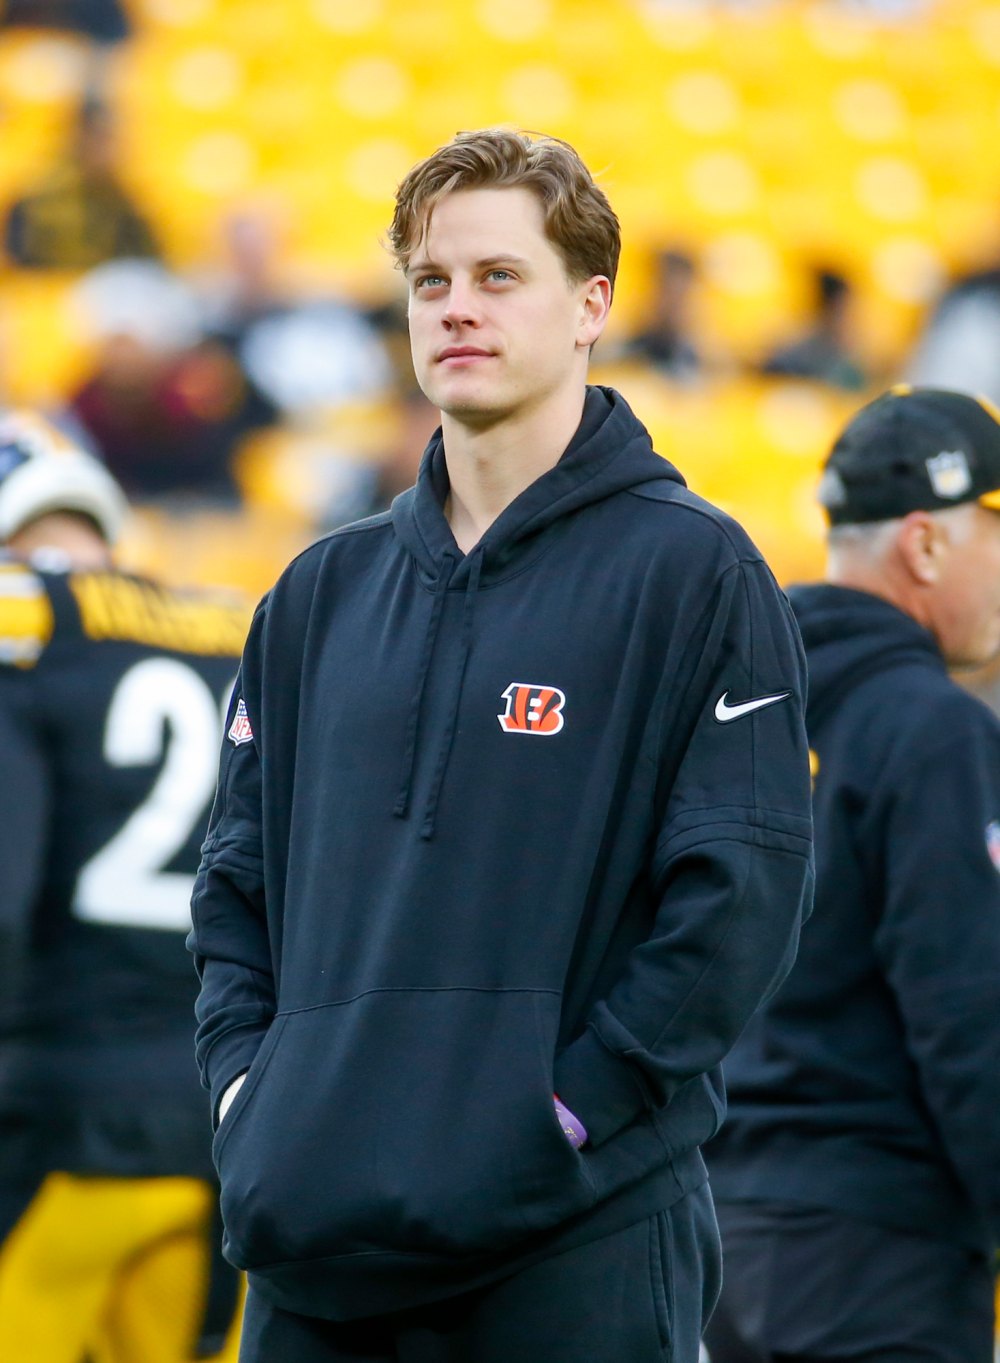 NFL Star Joe Burrow Says He Wears His ‘Depressed Sweatpants to Press Conferences After Losing Games